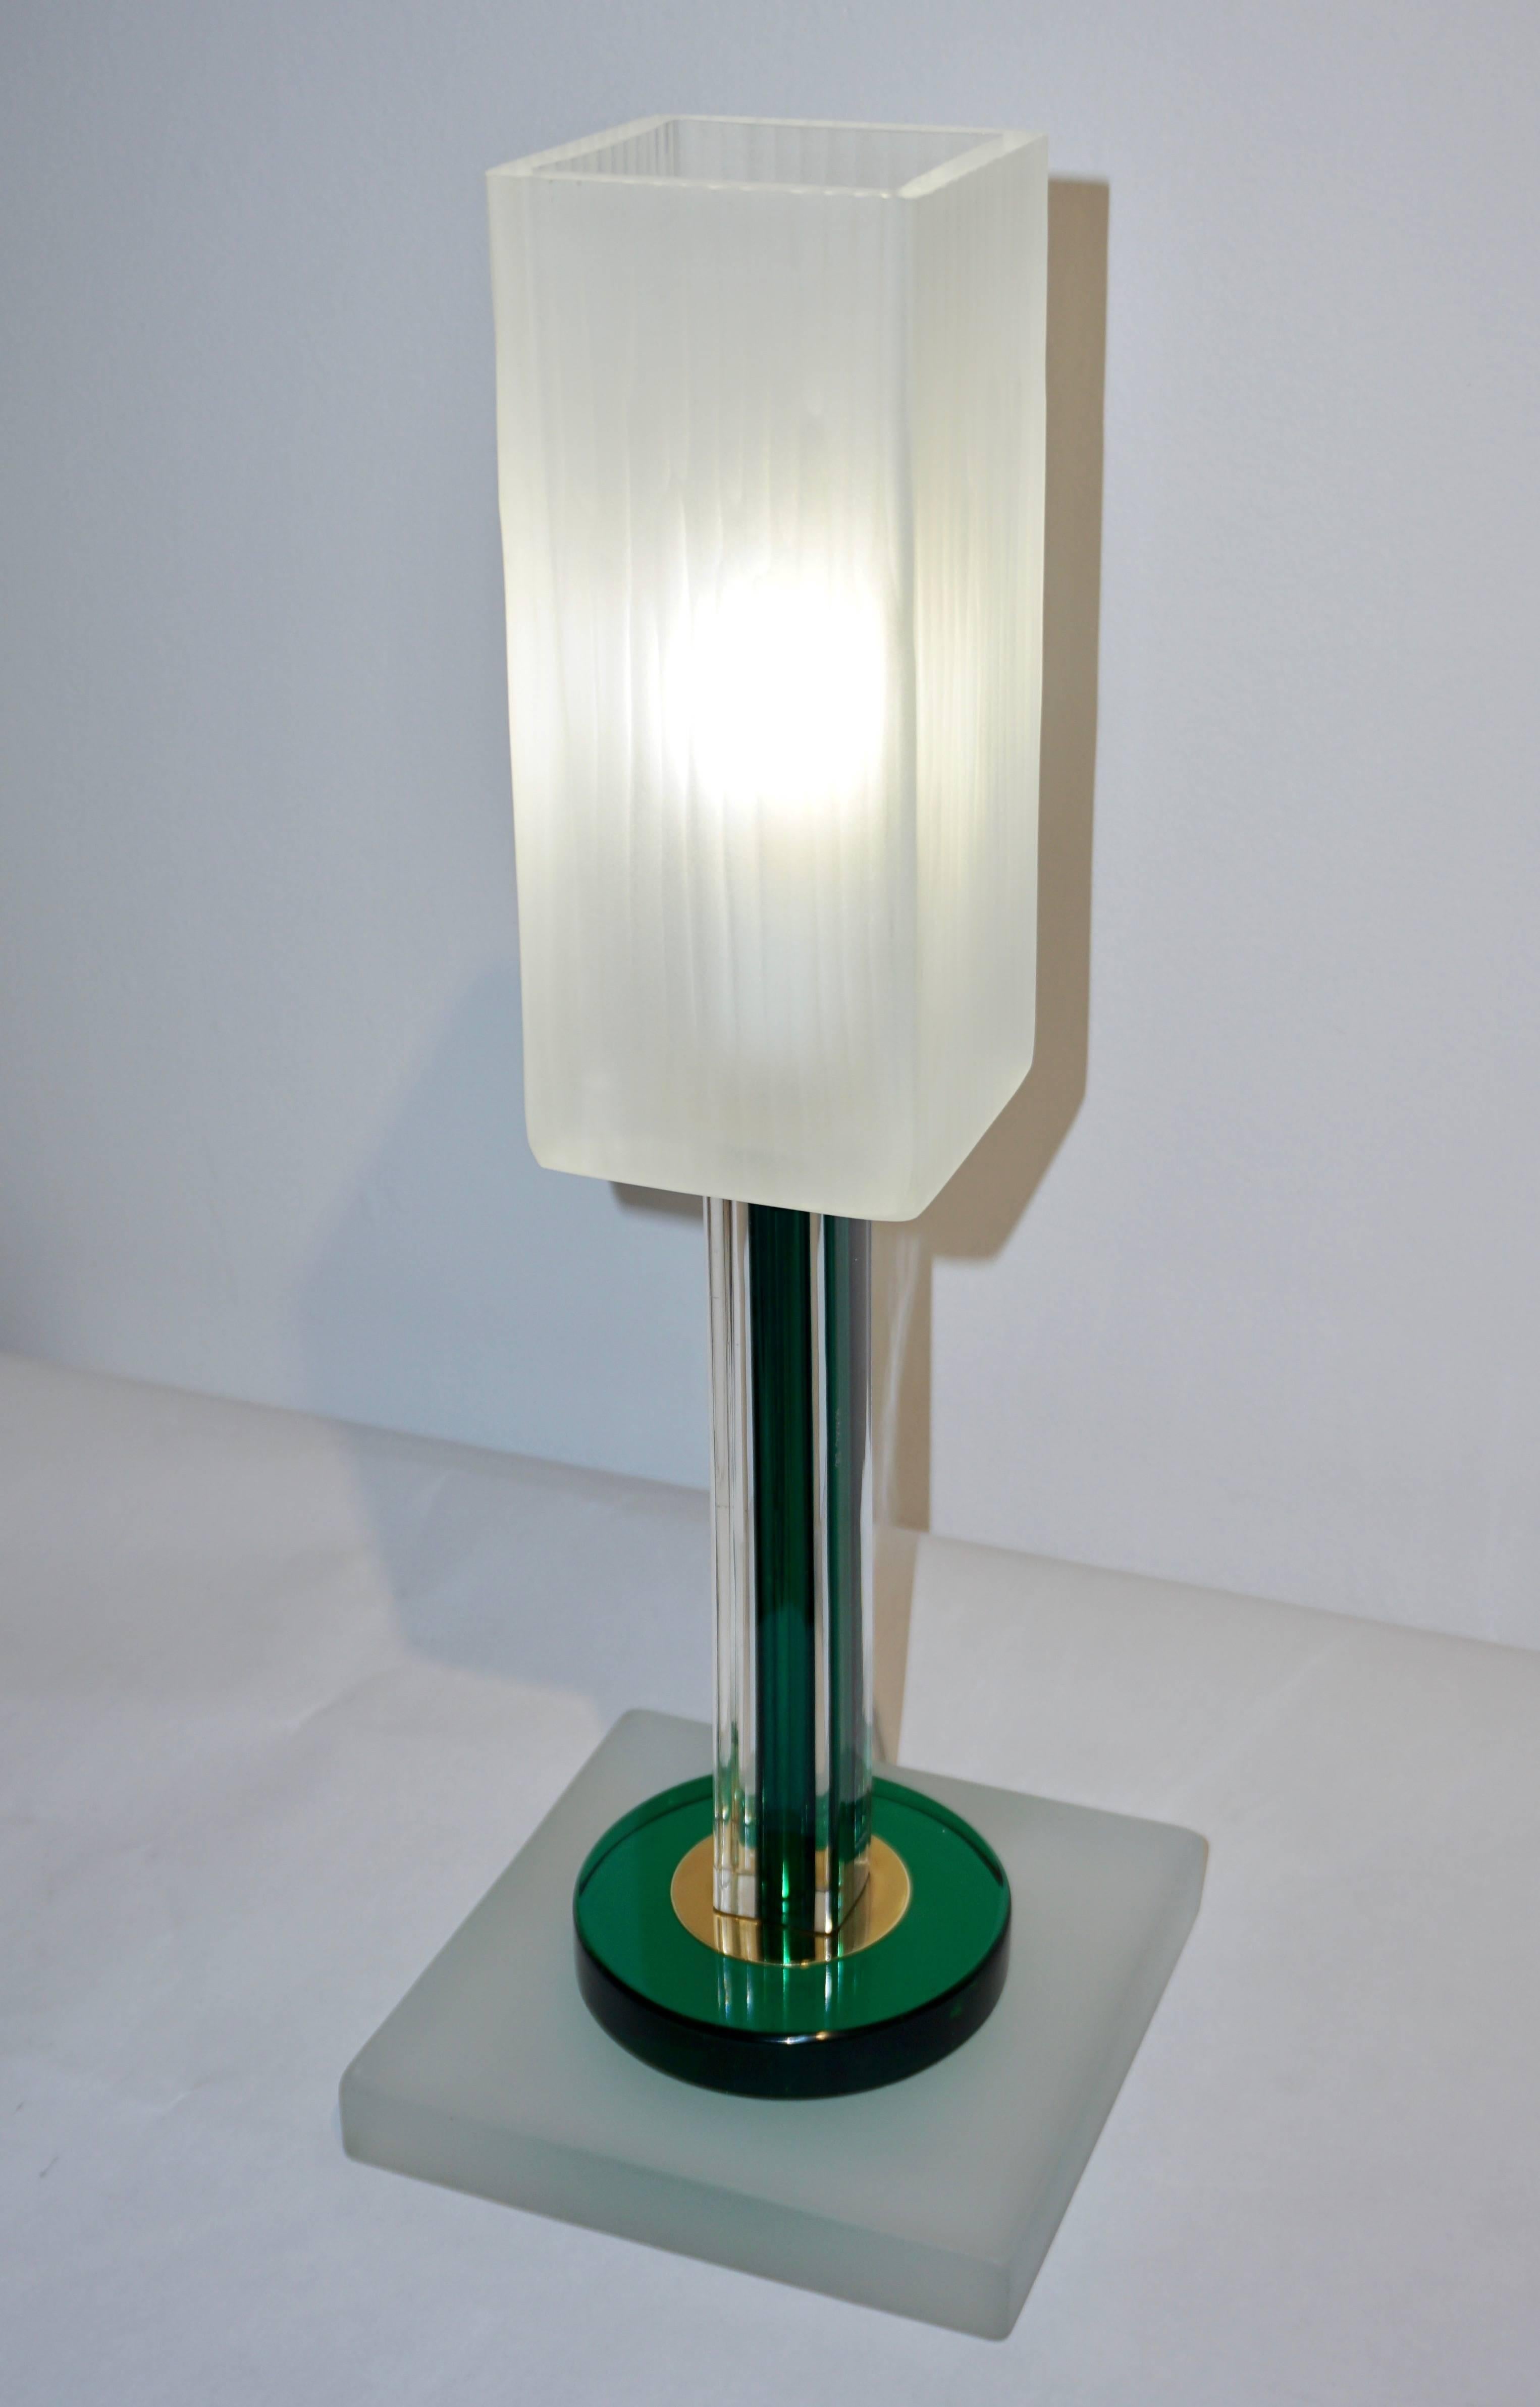 Organic Modern Venini Vintage Green Pair of Table Lamps with White Frosted Murano Glass Shades